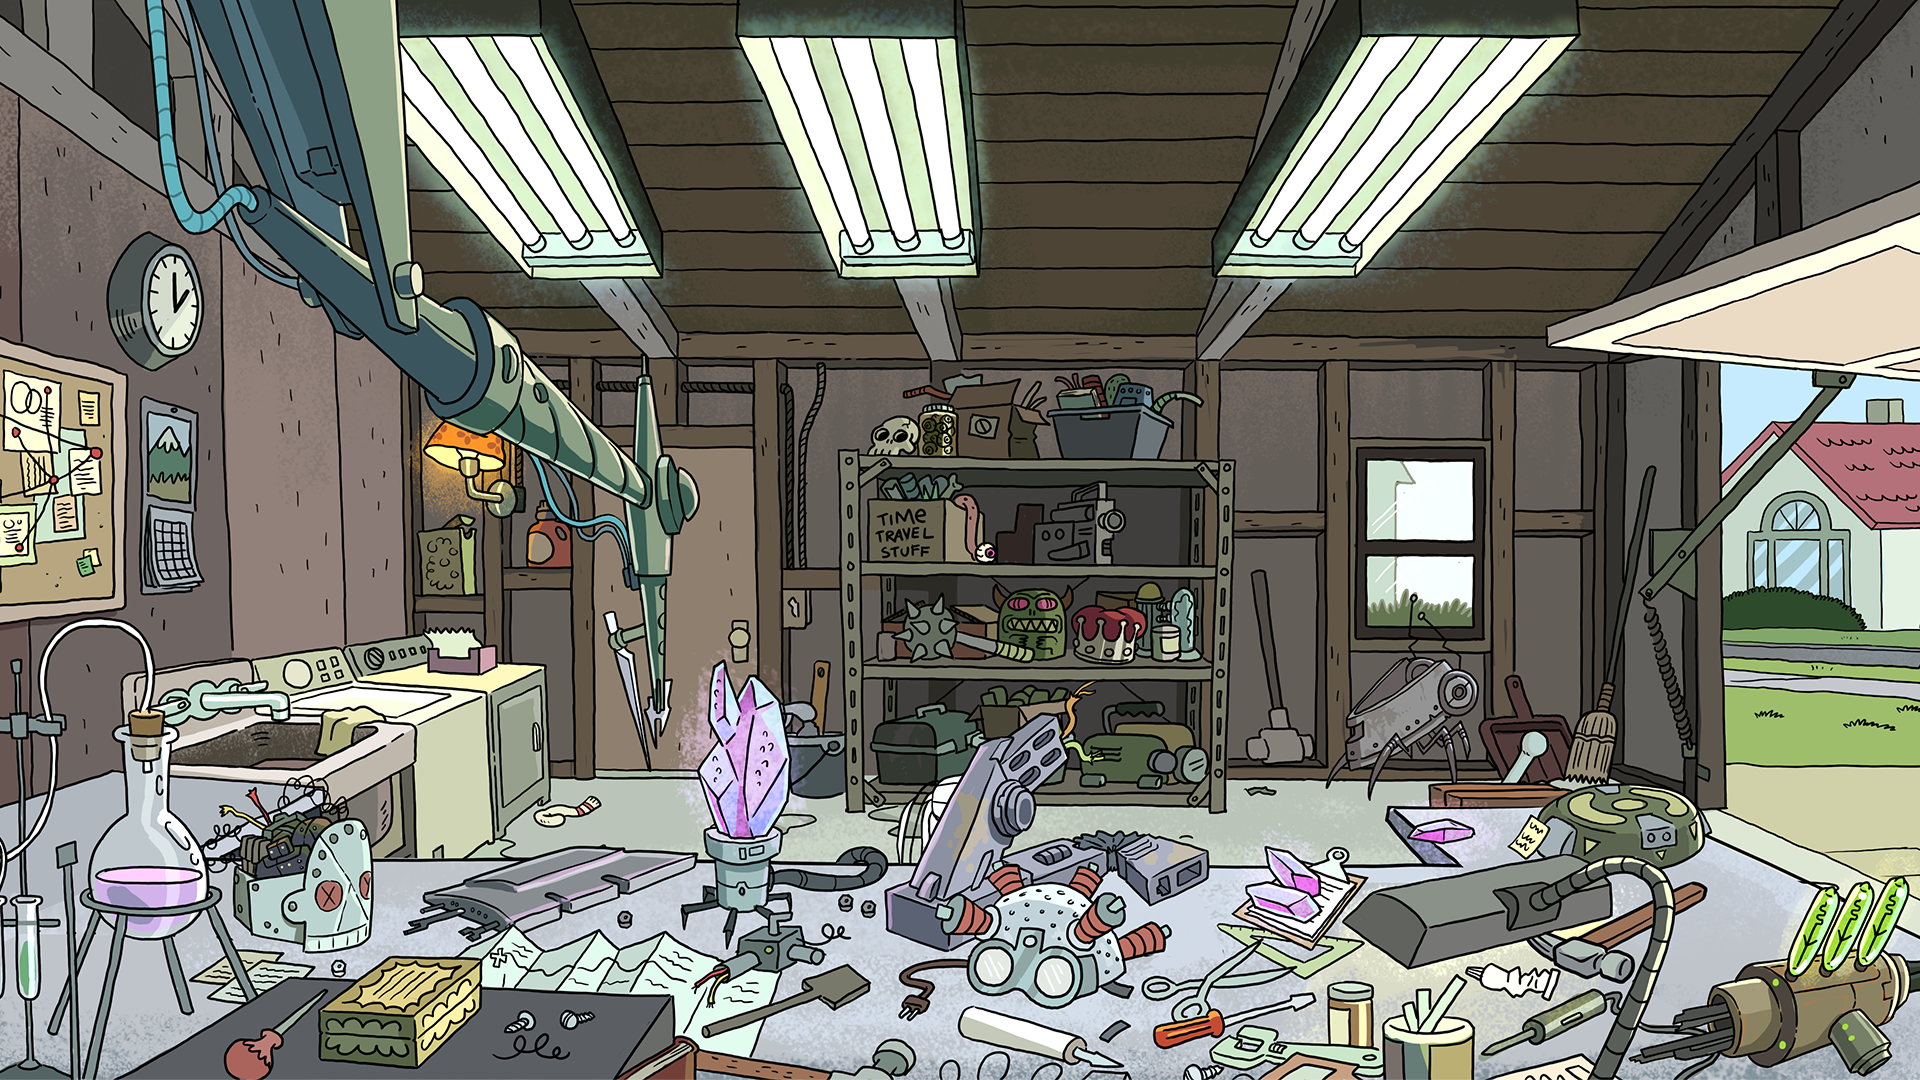 Rick And Morty Virtual Backgrounds Arrive For Zoom Video Conferencing Den Of Geek